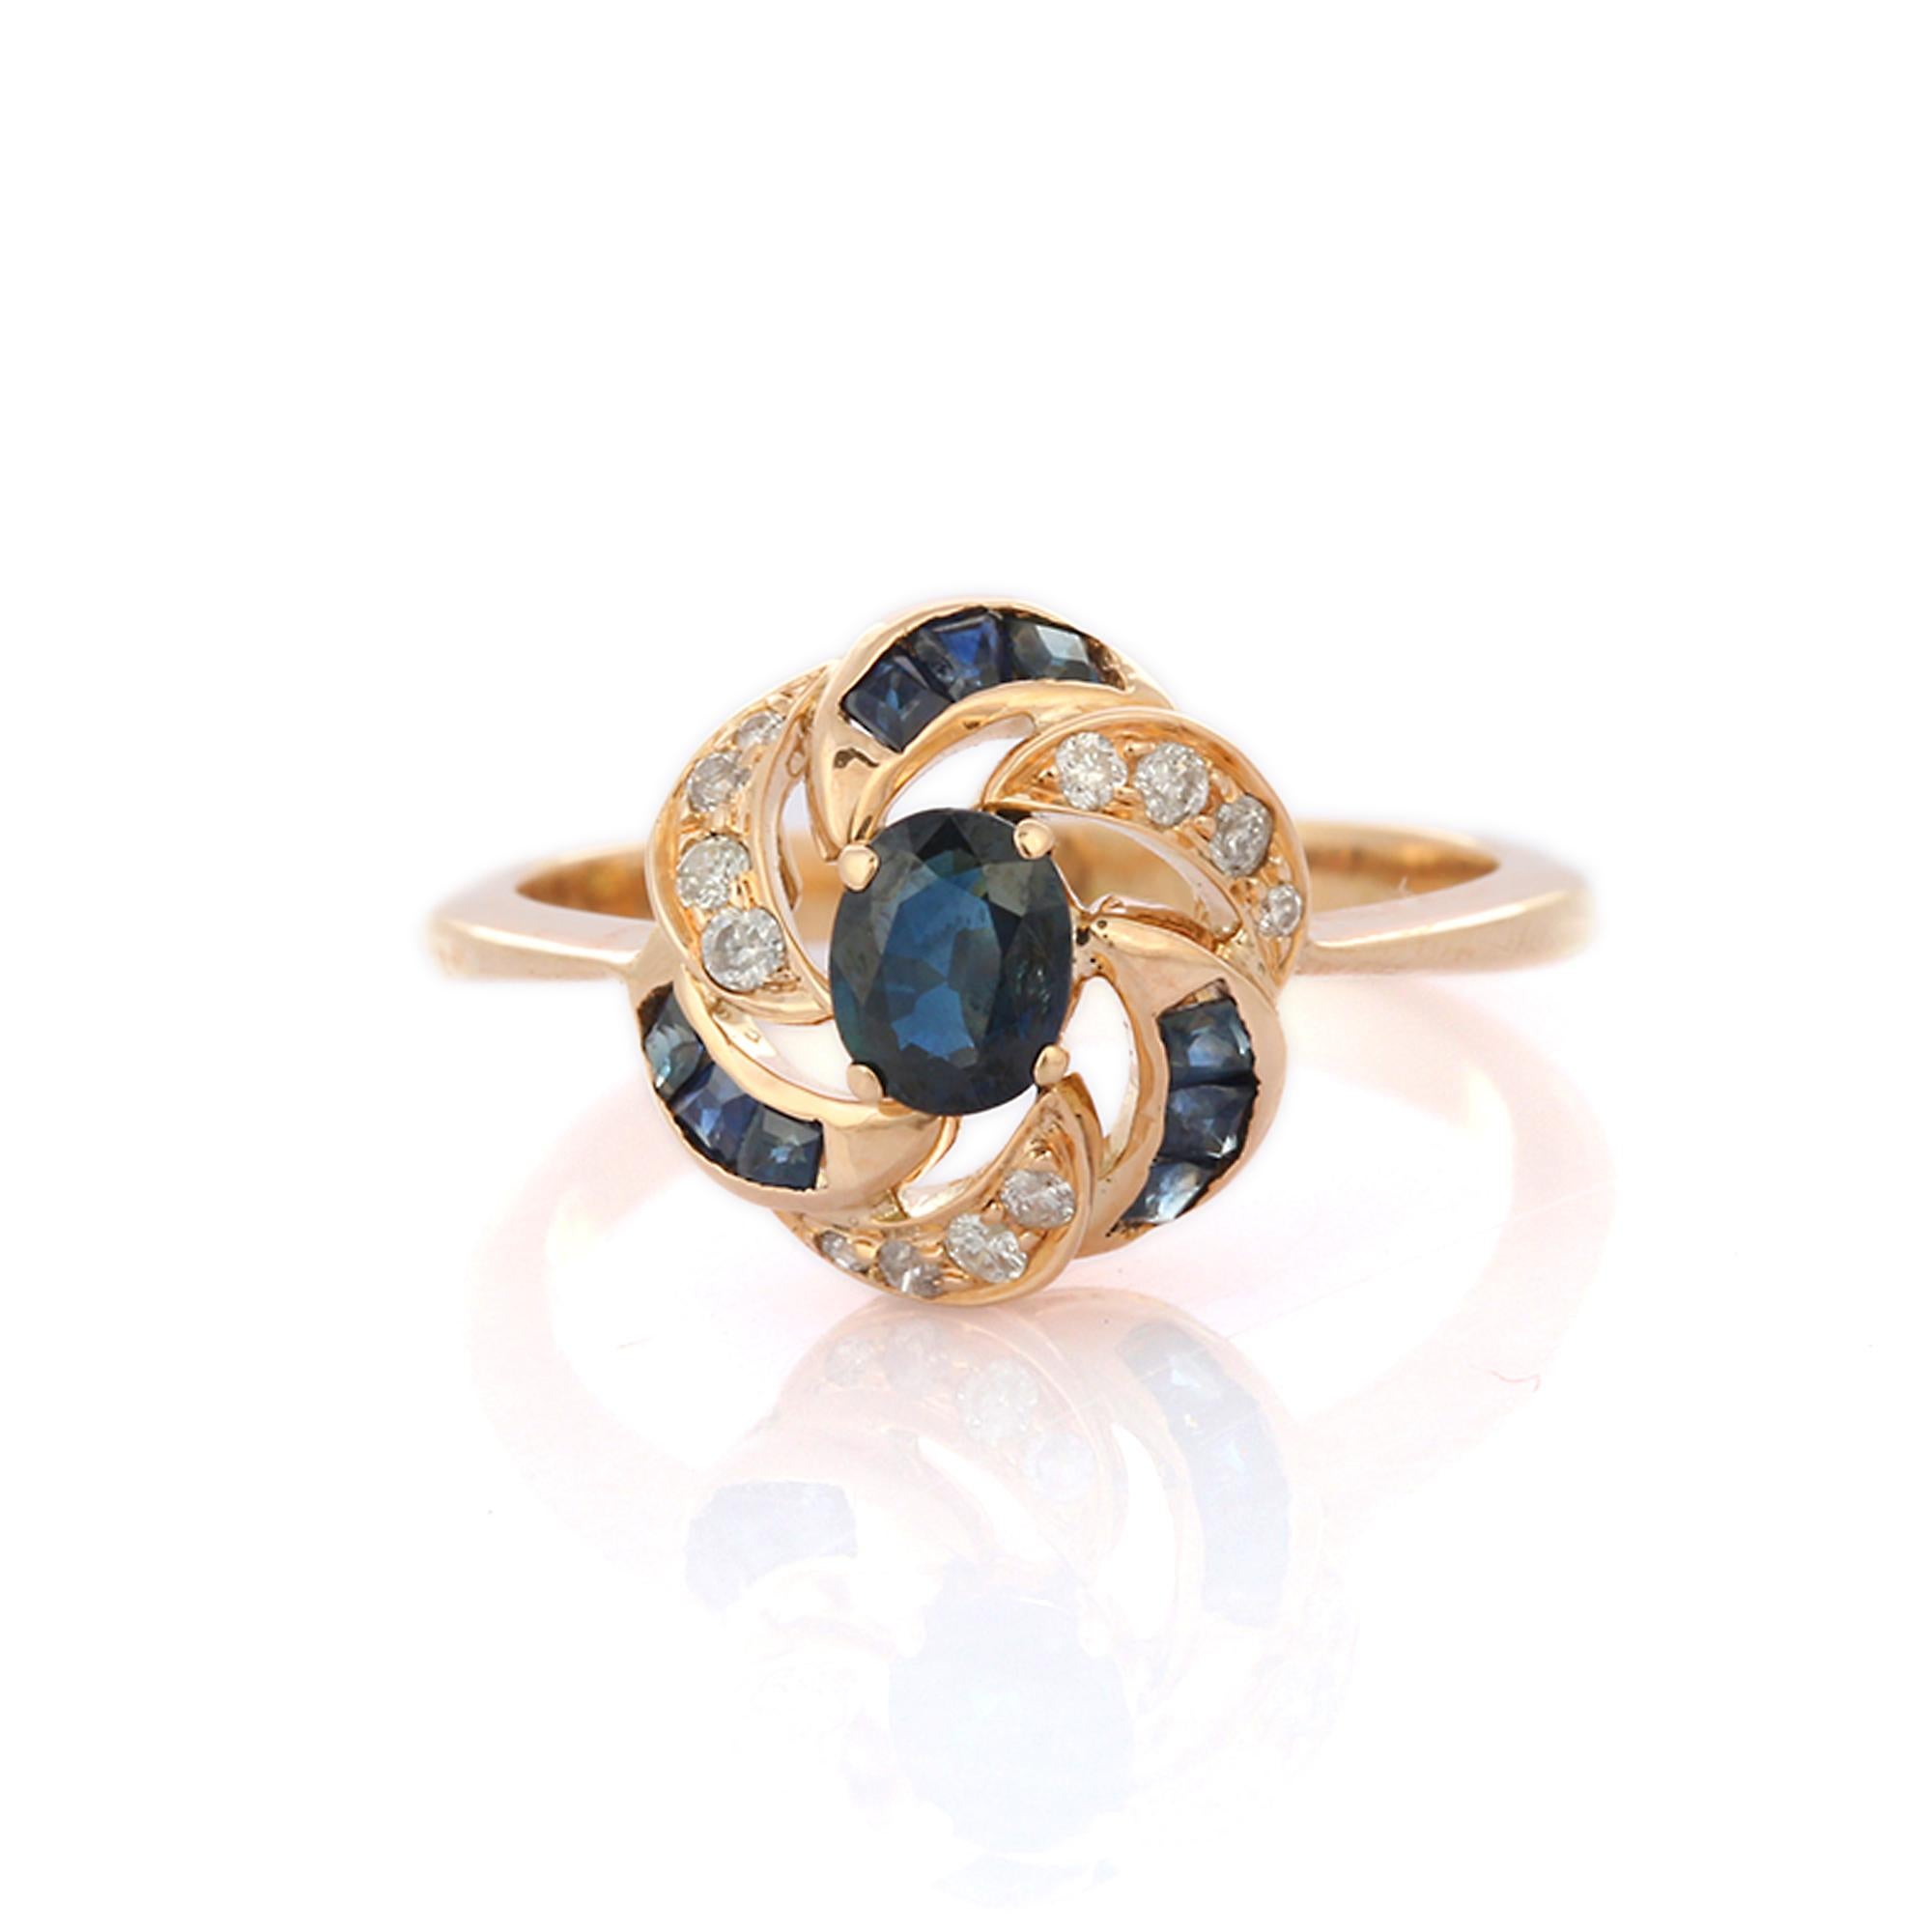 Im Angebot: Enticing Sapphire Diamond Floral Bridal Ring in 14K Solid Gelbgold () 5